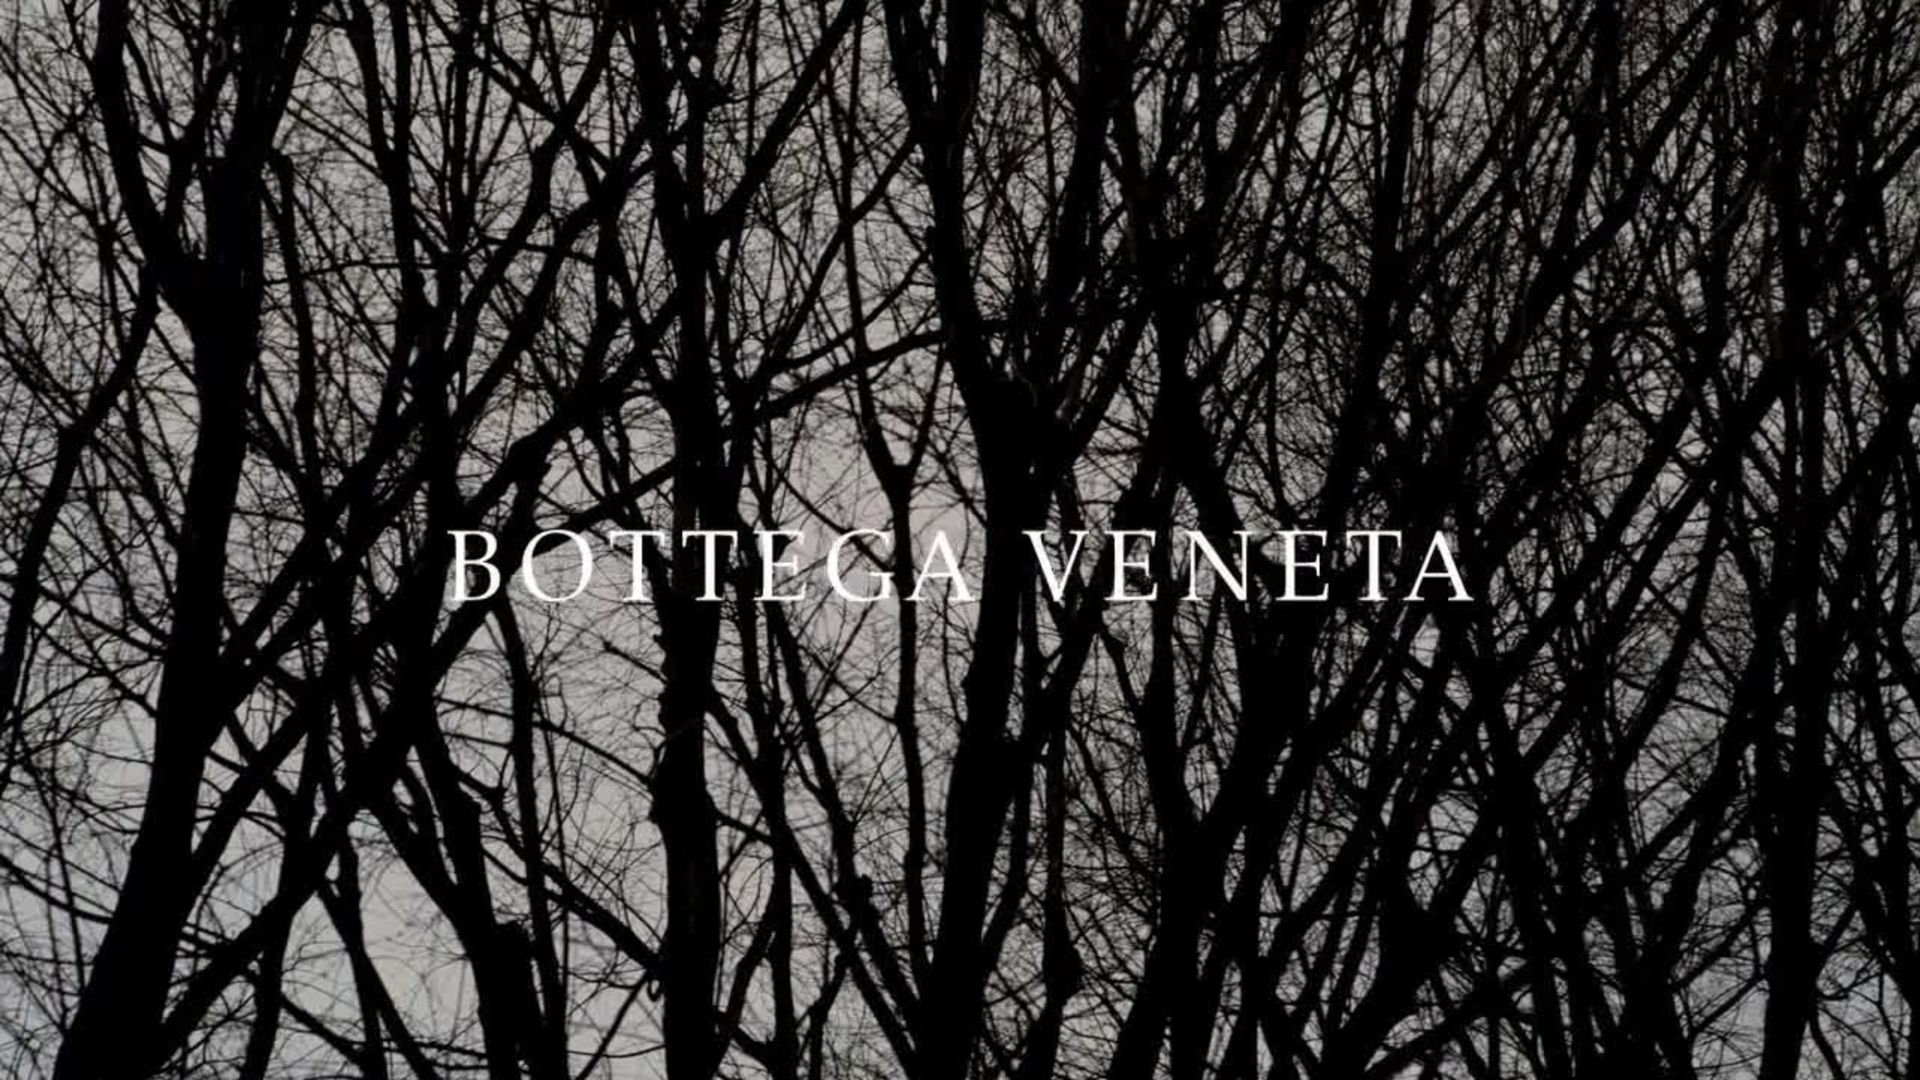 Bottega Veneta Debuts Fall Ad Campaign With Juergen Teller - Daily Front Row